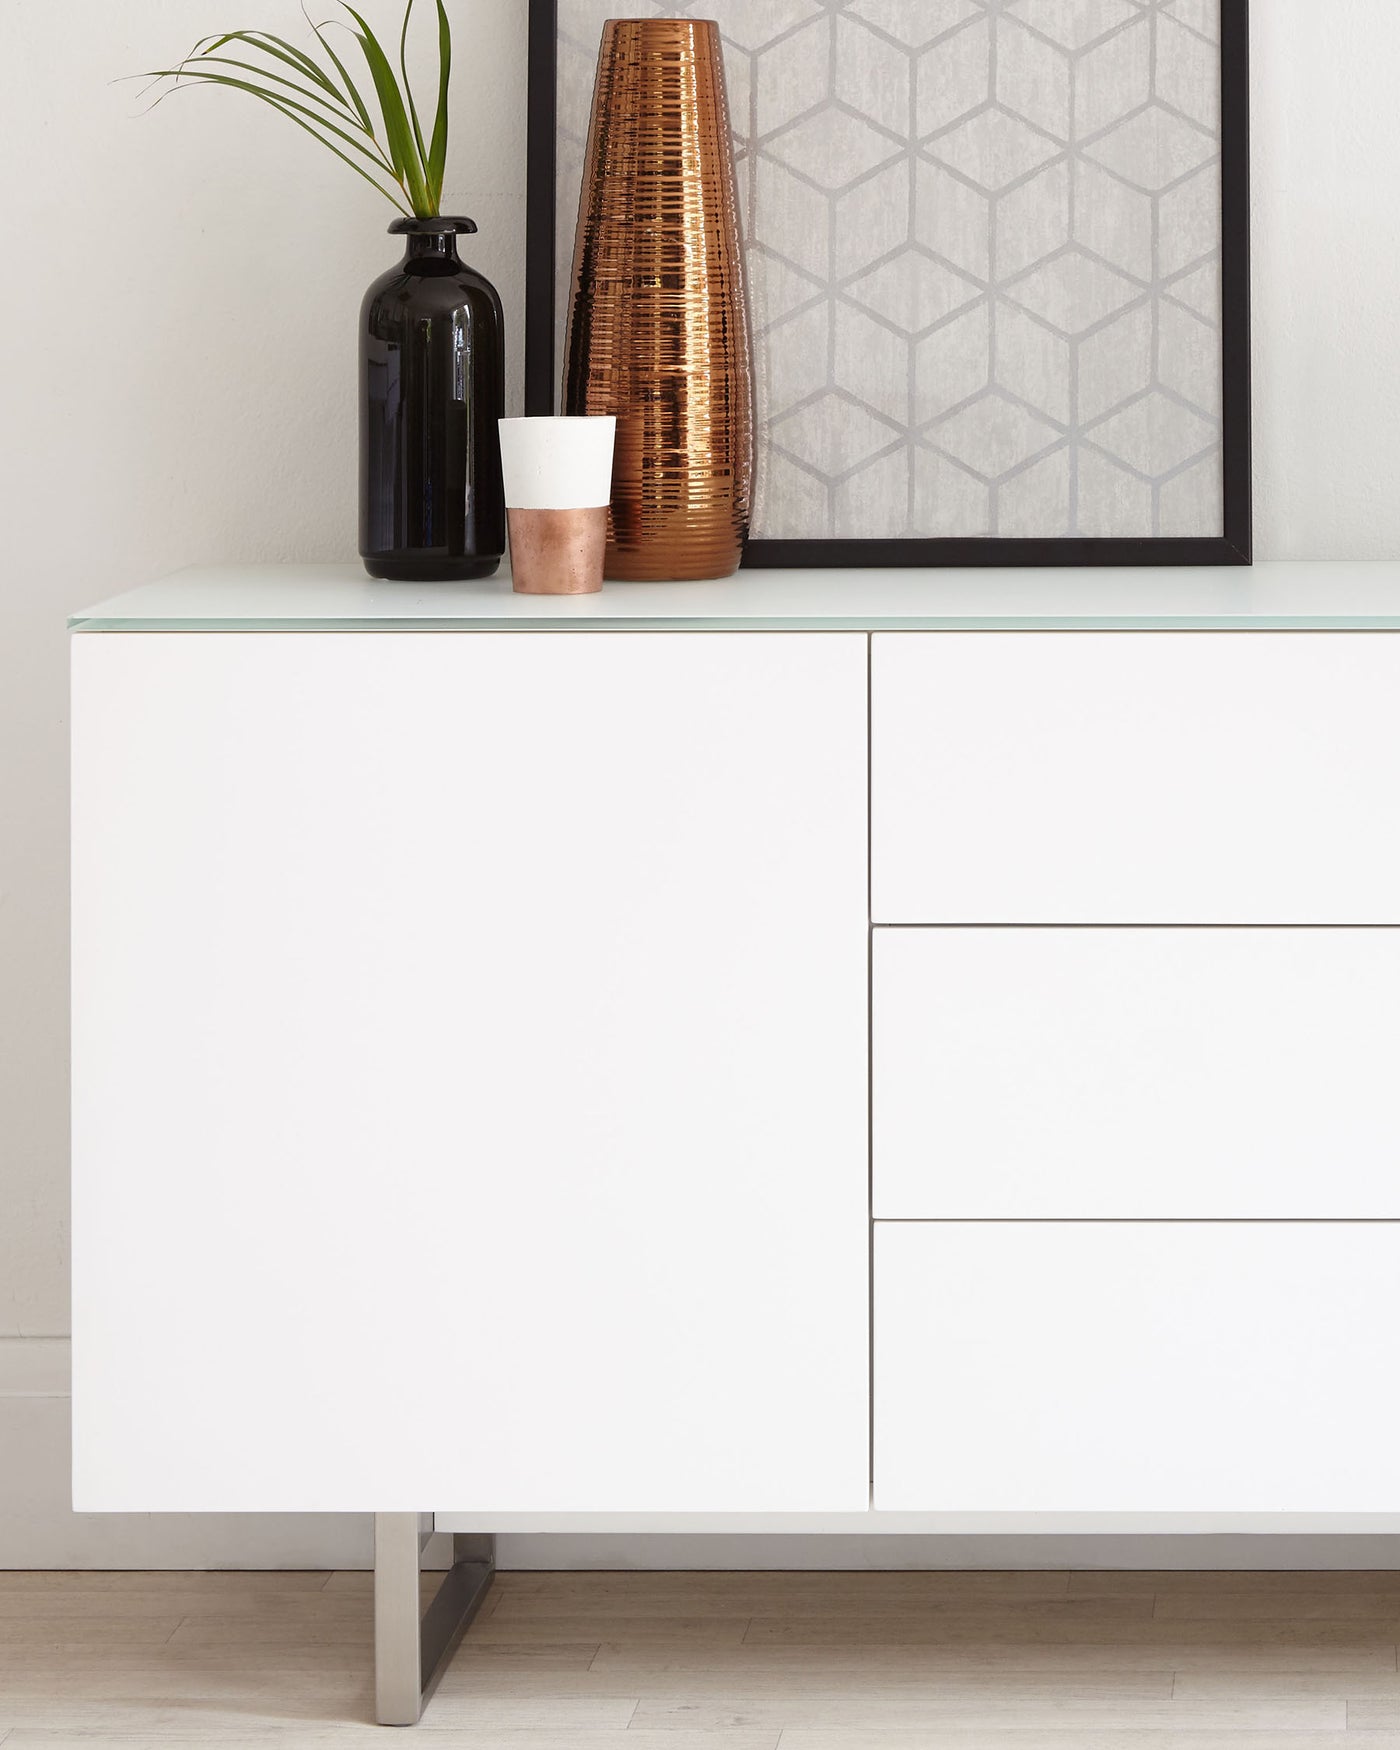 Modern minimalist sideboard with a matte white finish and sleek metal legs. The sideboard features one large cabinet door and three drawers on the right side, offering a blend of concealed and organized storage. It is topped with a frosted glass surface, complemented by decorative items including a tall copper vase, a small plant in a black vase, and a framed geometric artwork resting against the wall. The design showcases clean lines and a contemporary aesthetic ideal for modern living spaces.